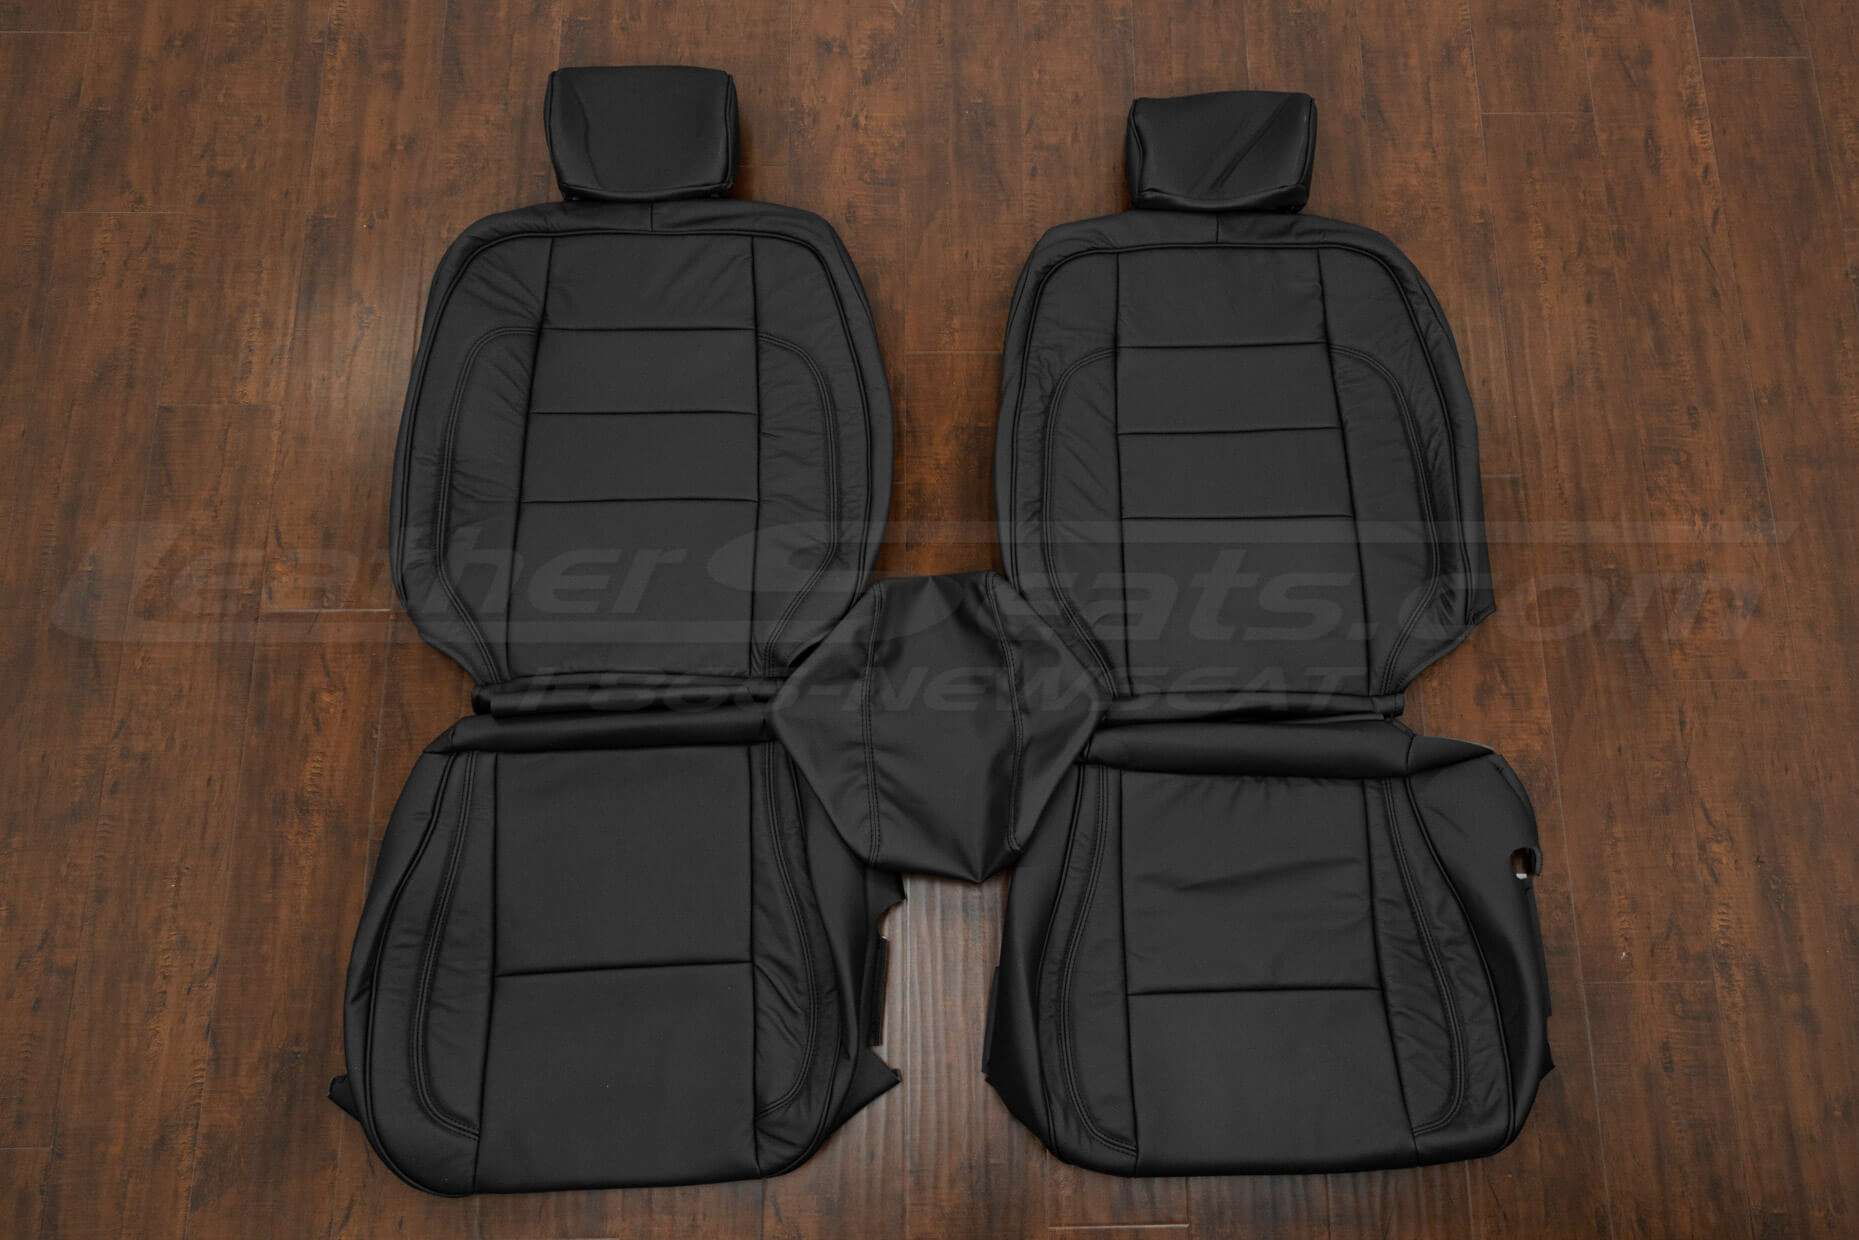 1998-2005 Lexus GS300 Leather Seat Upholstery Kit - Black - Front seat upholstery with Console Lid Cover